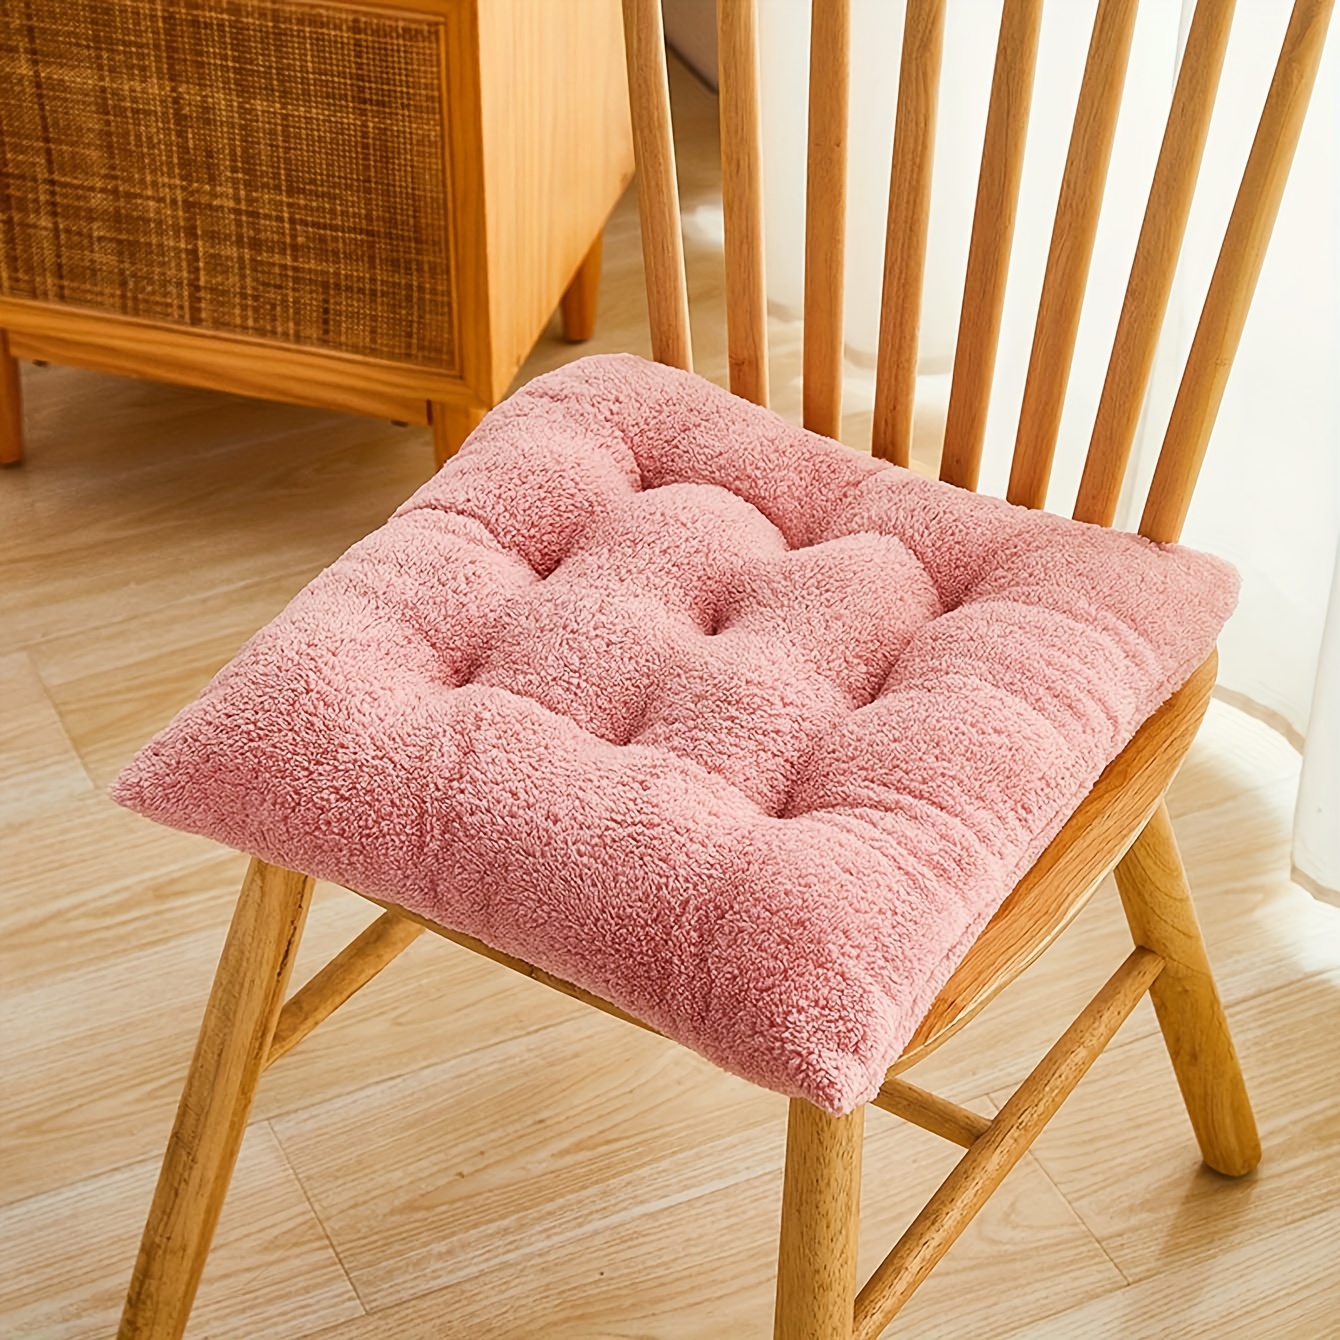 TUNKENCE Solid Chair Pad Seat Cushion for Car Seat Super Soft and  Comfortable Plush Chair Cushion Non Slip Winter Warm Chair Cushion  Comfortable